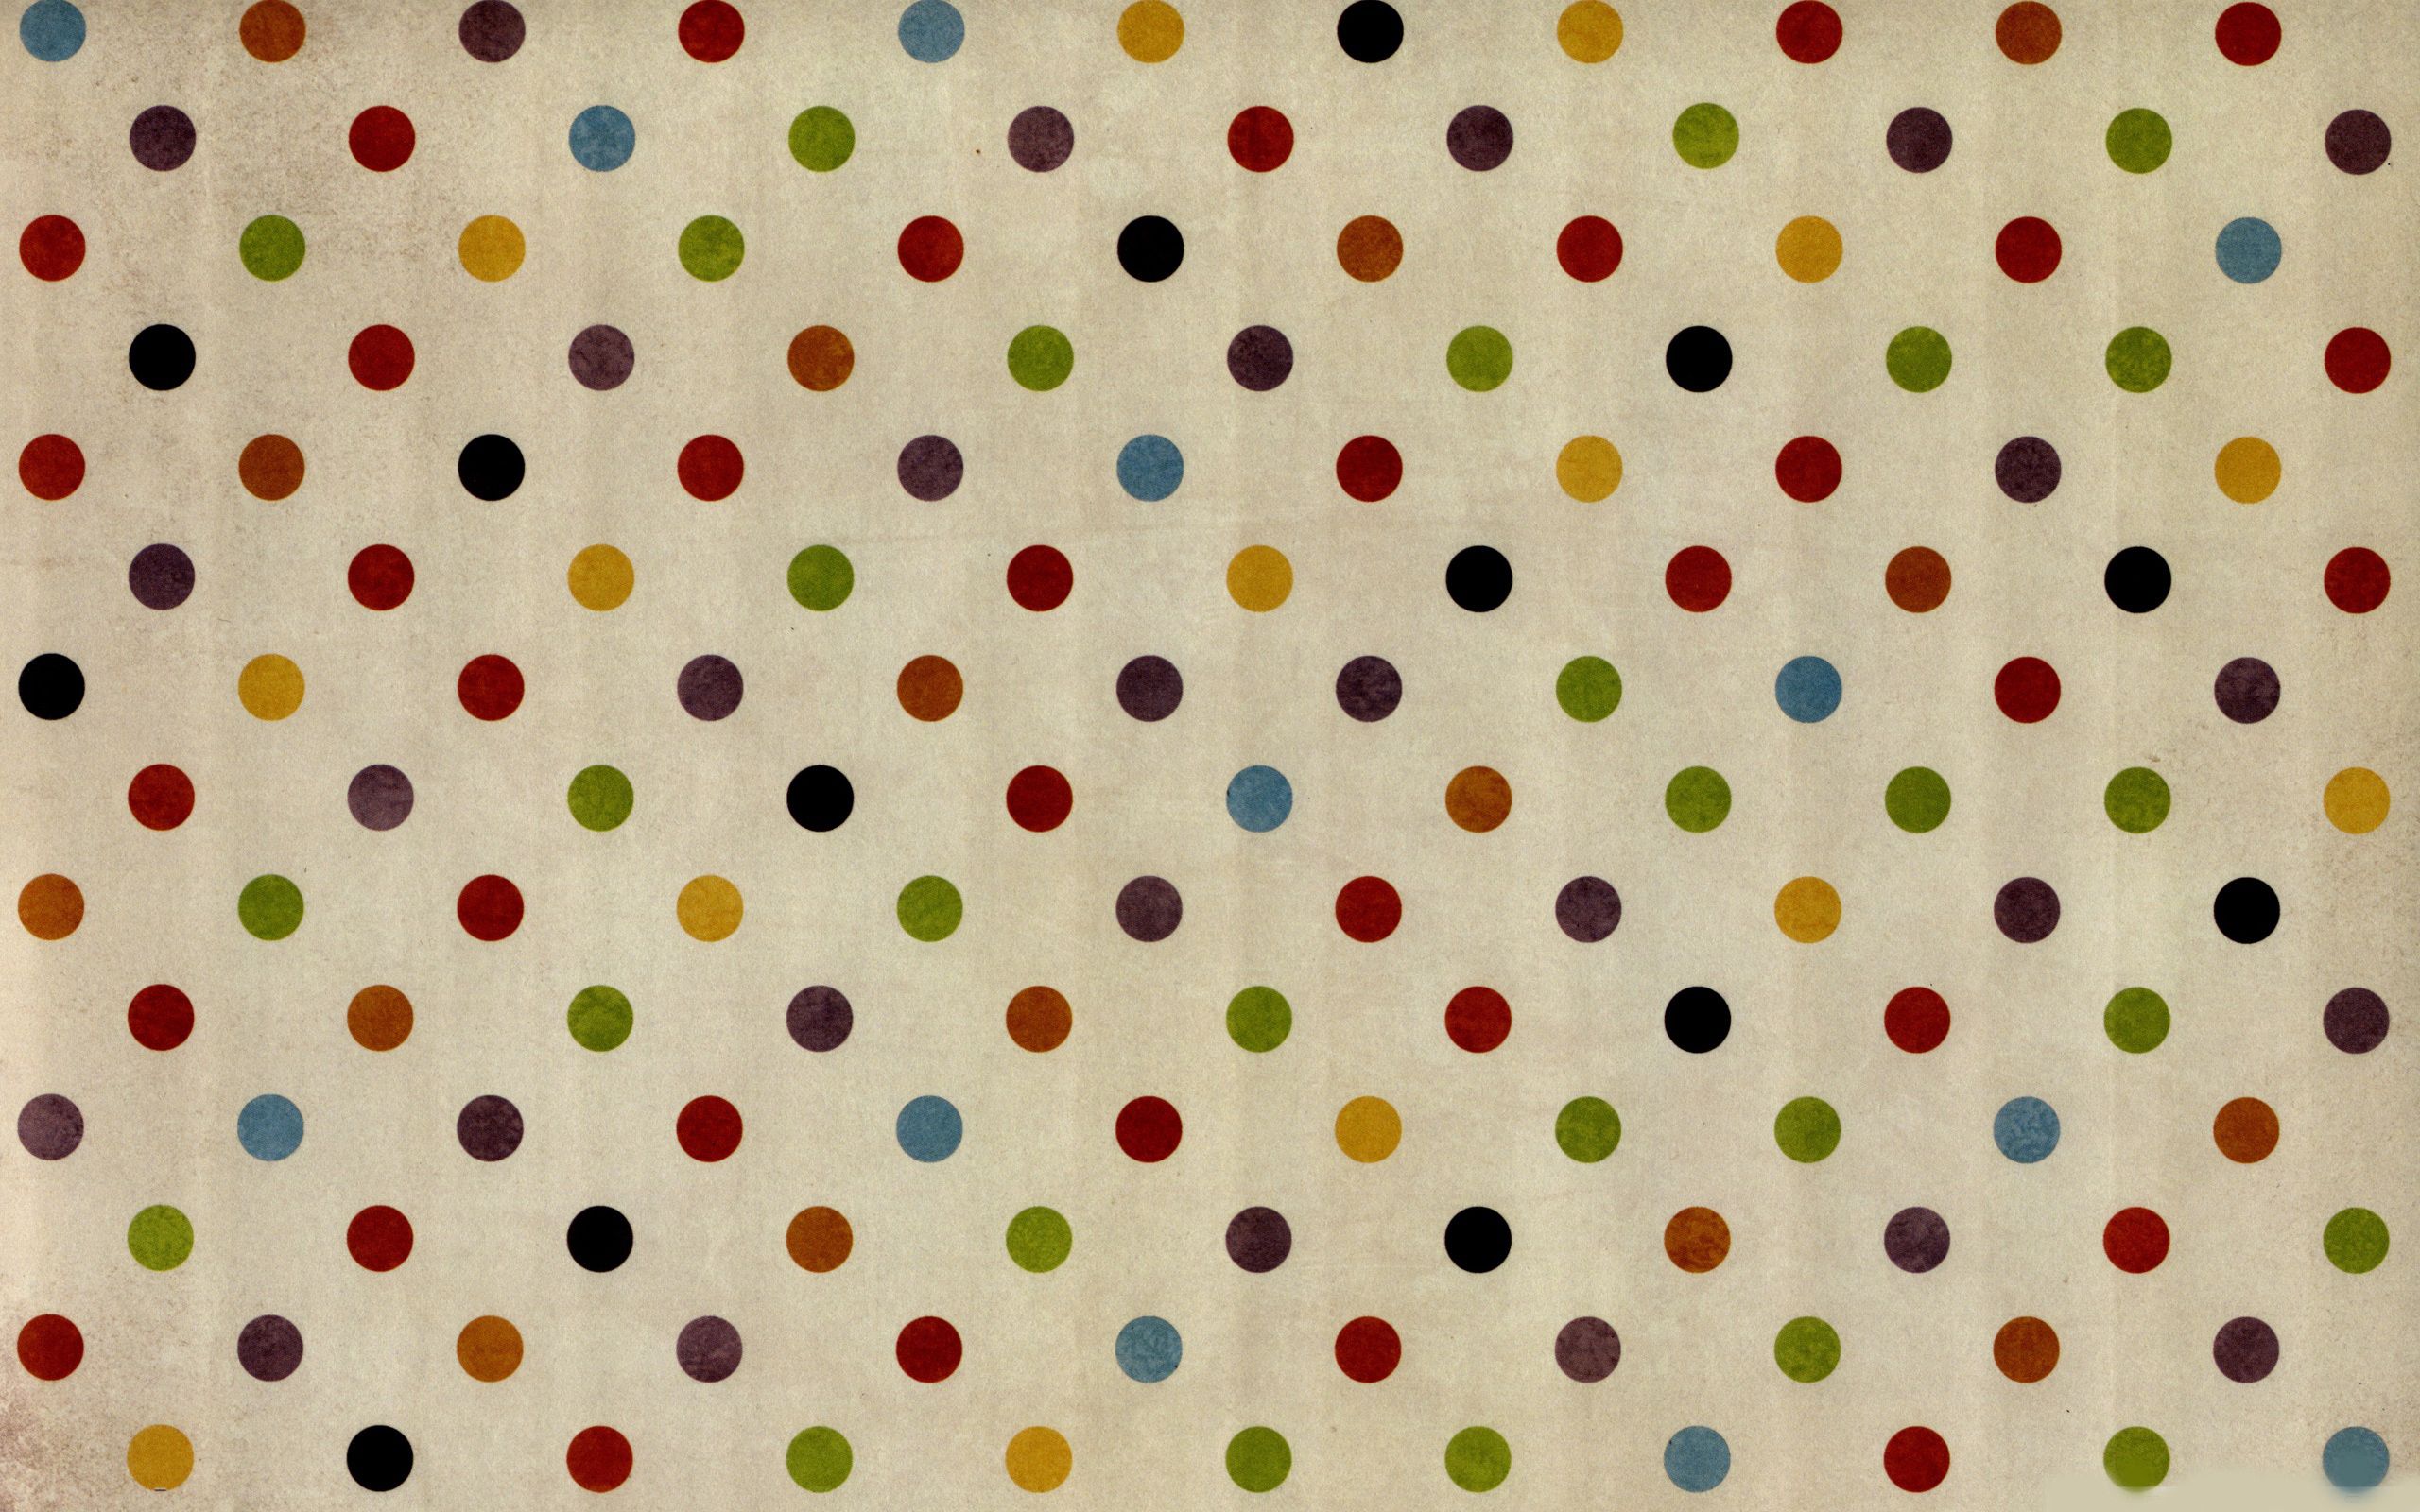 motley, textures, texture, circles, multicolored, surface wallpaper for mobile